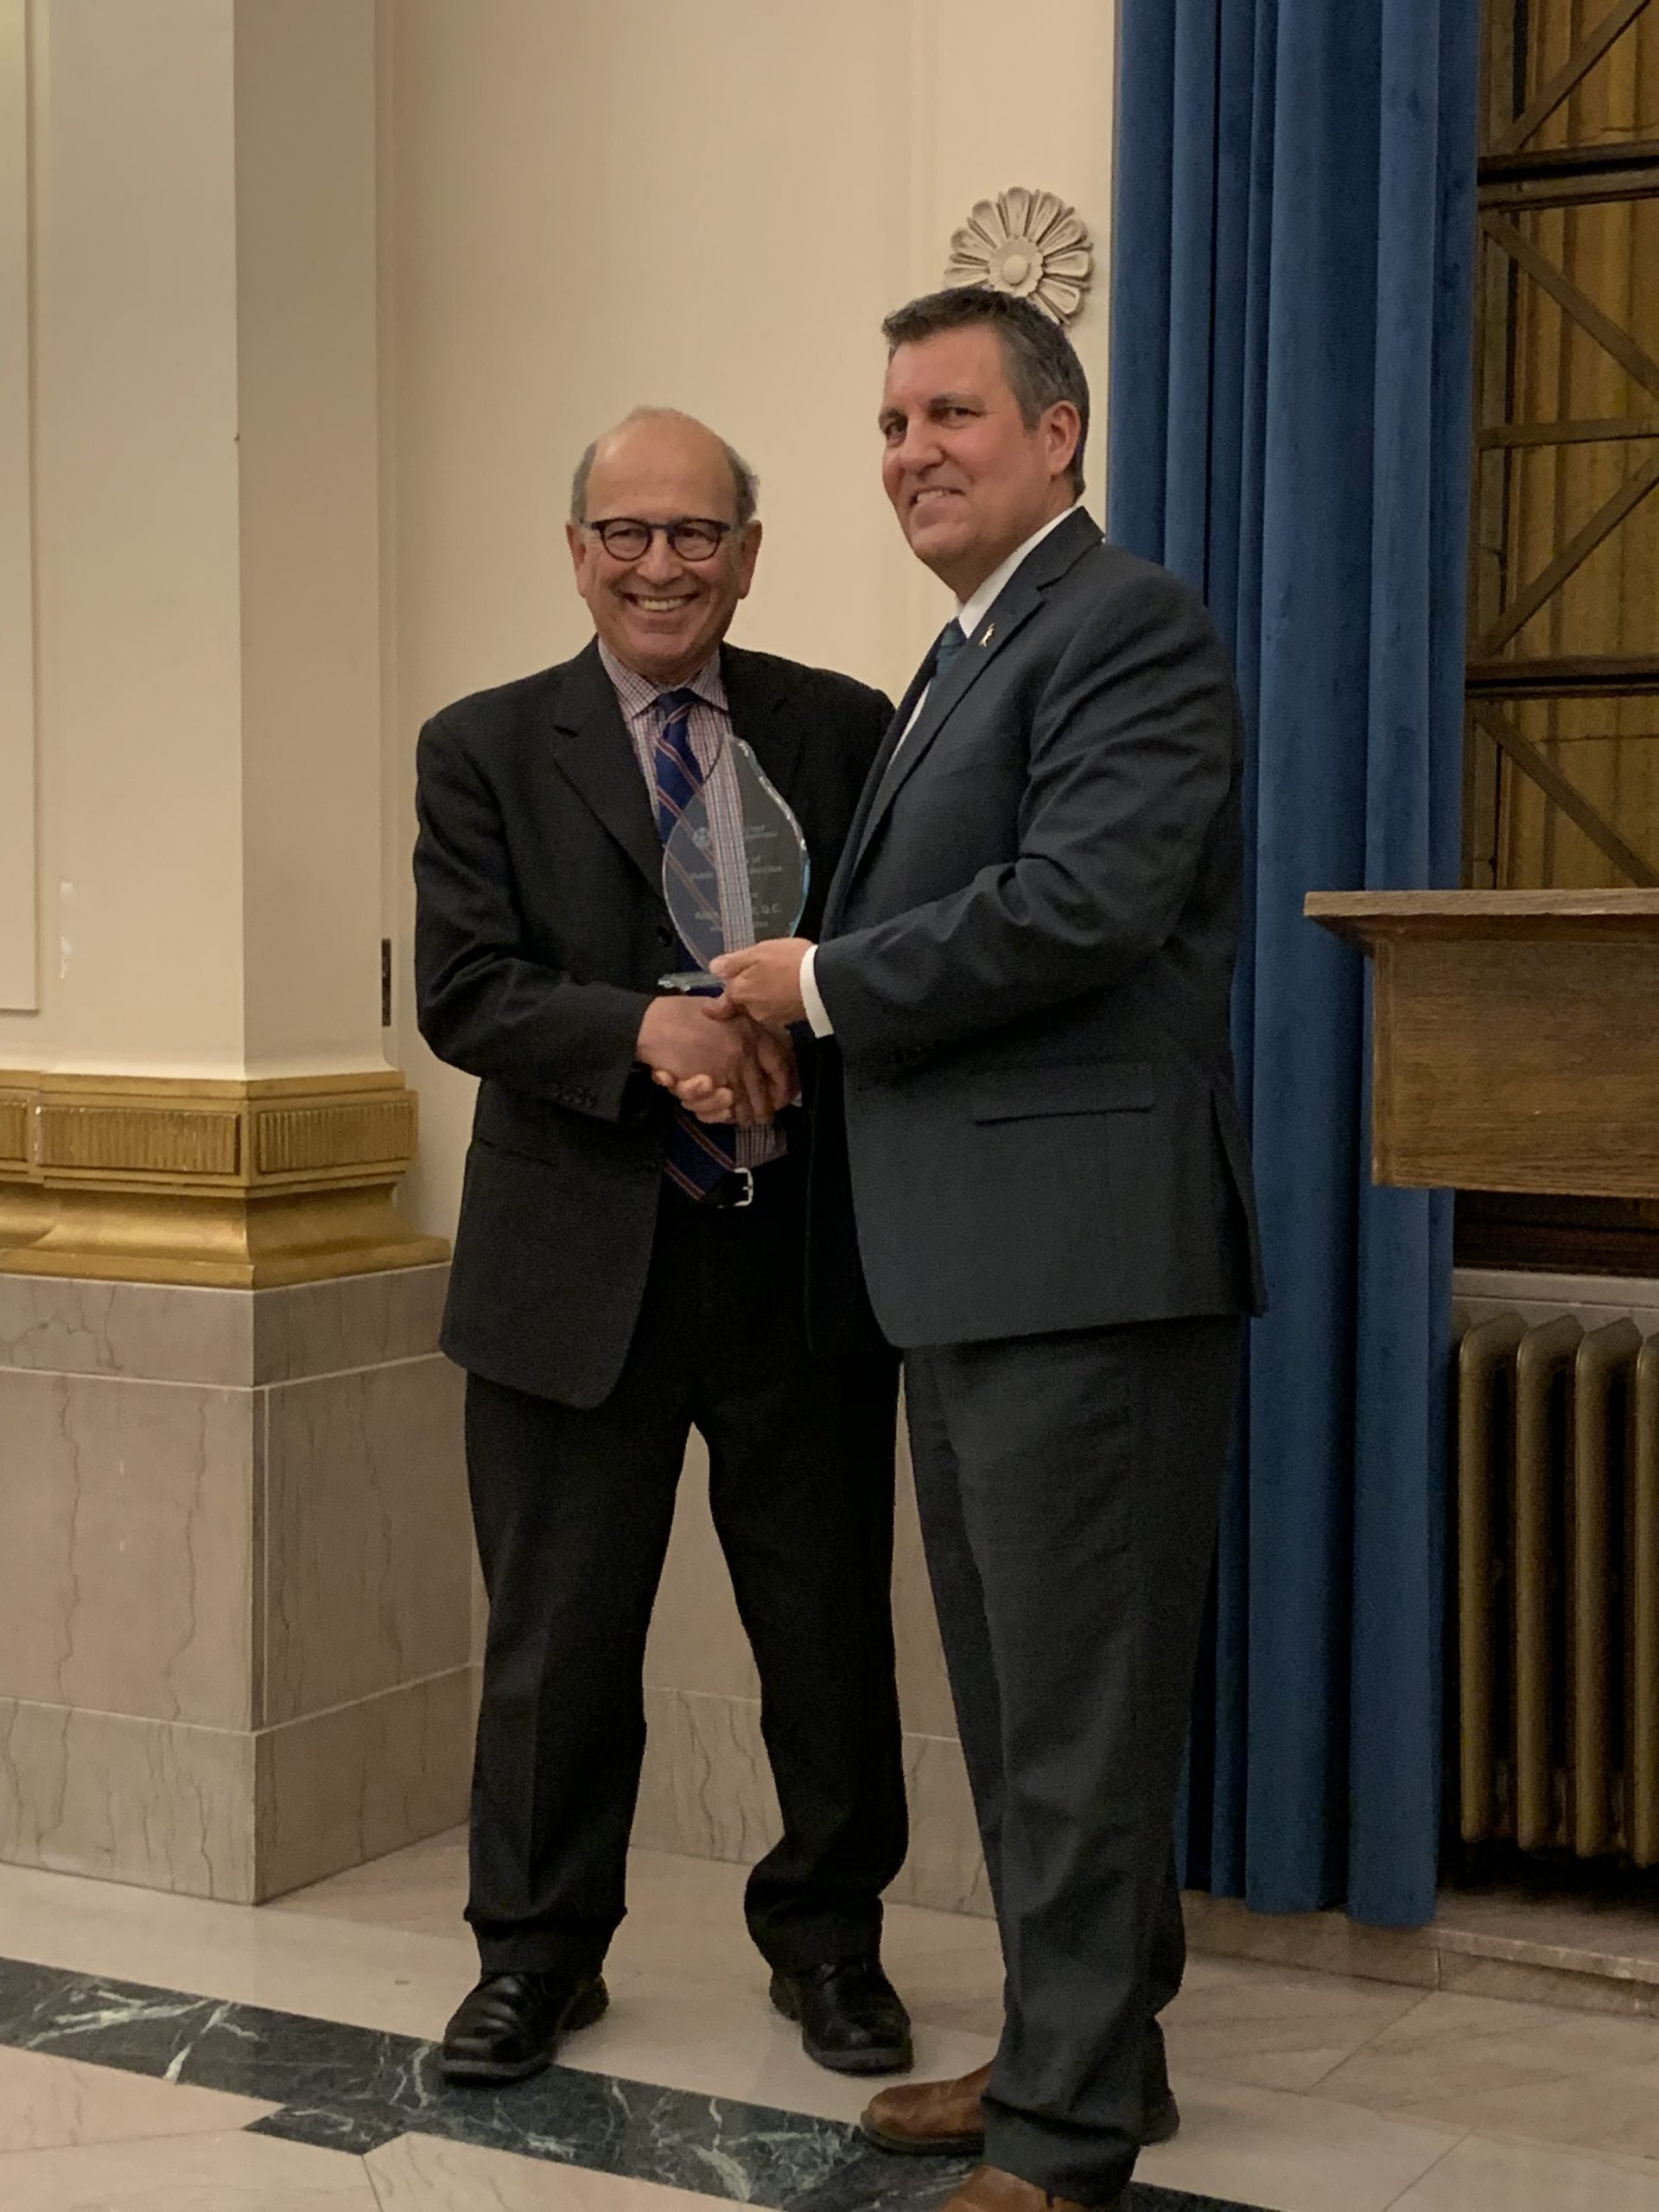 Minister of Justice, Hon. Cliff Cullen presenting Award to Allan Fineblit